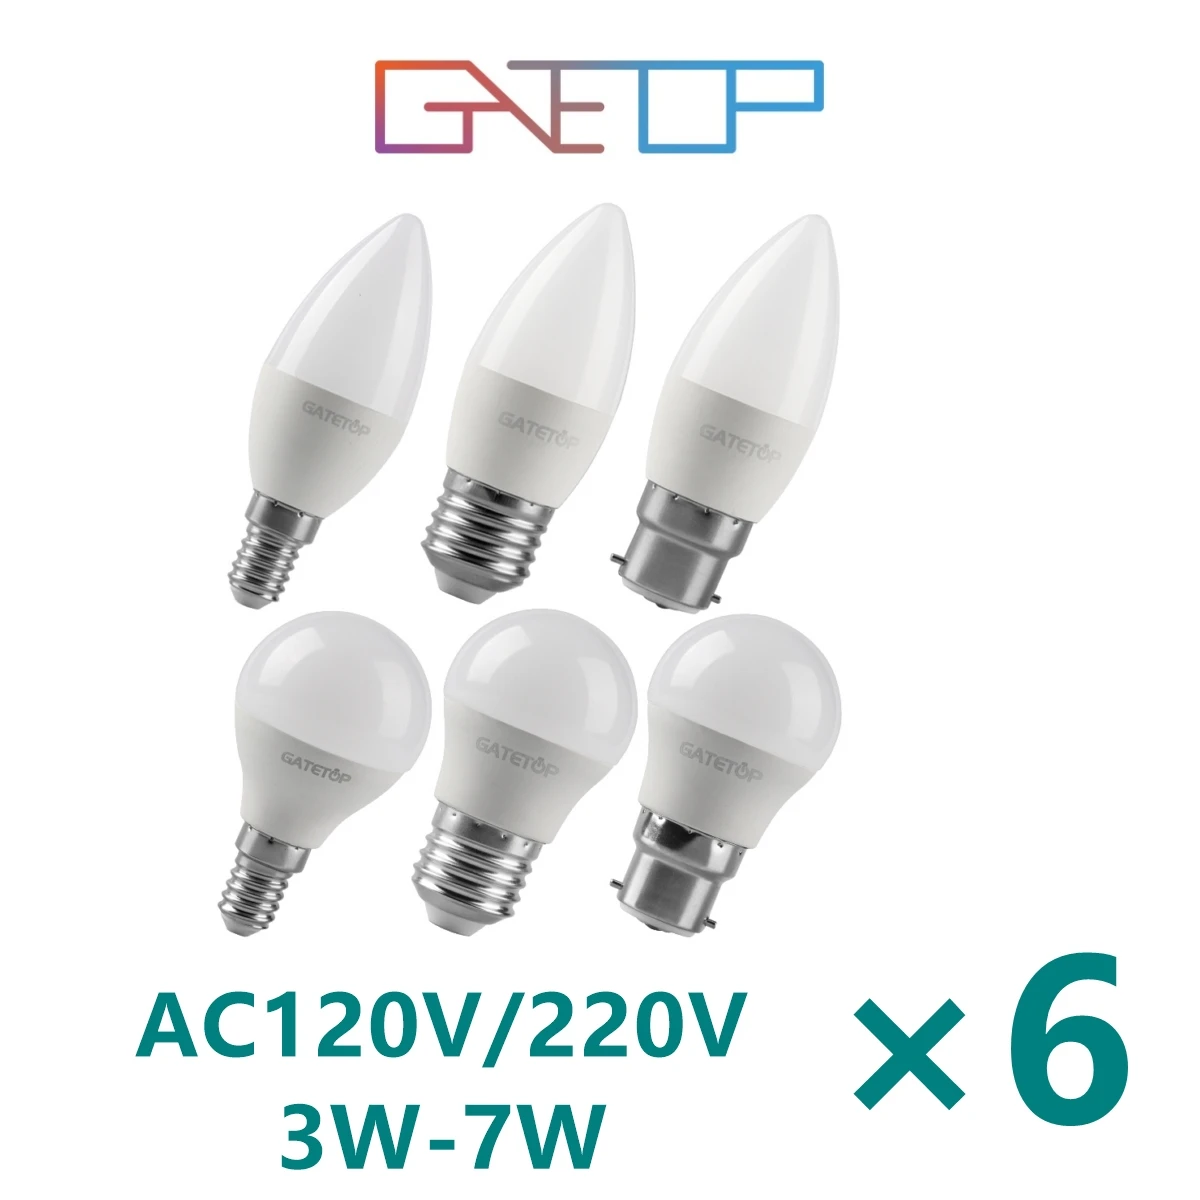 6PCS LED bulbs Energy-efficient G45 C37 E14 E27 B22 3W 5W 6W 7W AC230V AC110V Led Golf Bulb Lamp For Home Decoration rgb dimmable led lamp e27 energy saving party decoration atmosphere bulb led spotlights smart lights bulb with remote control